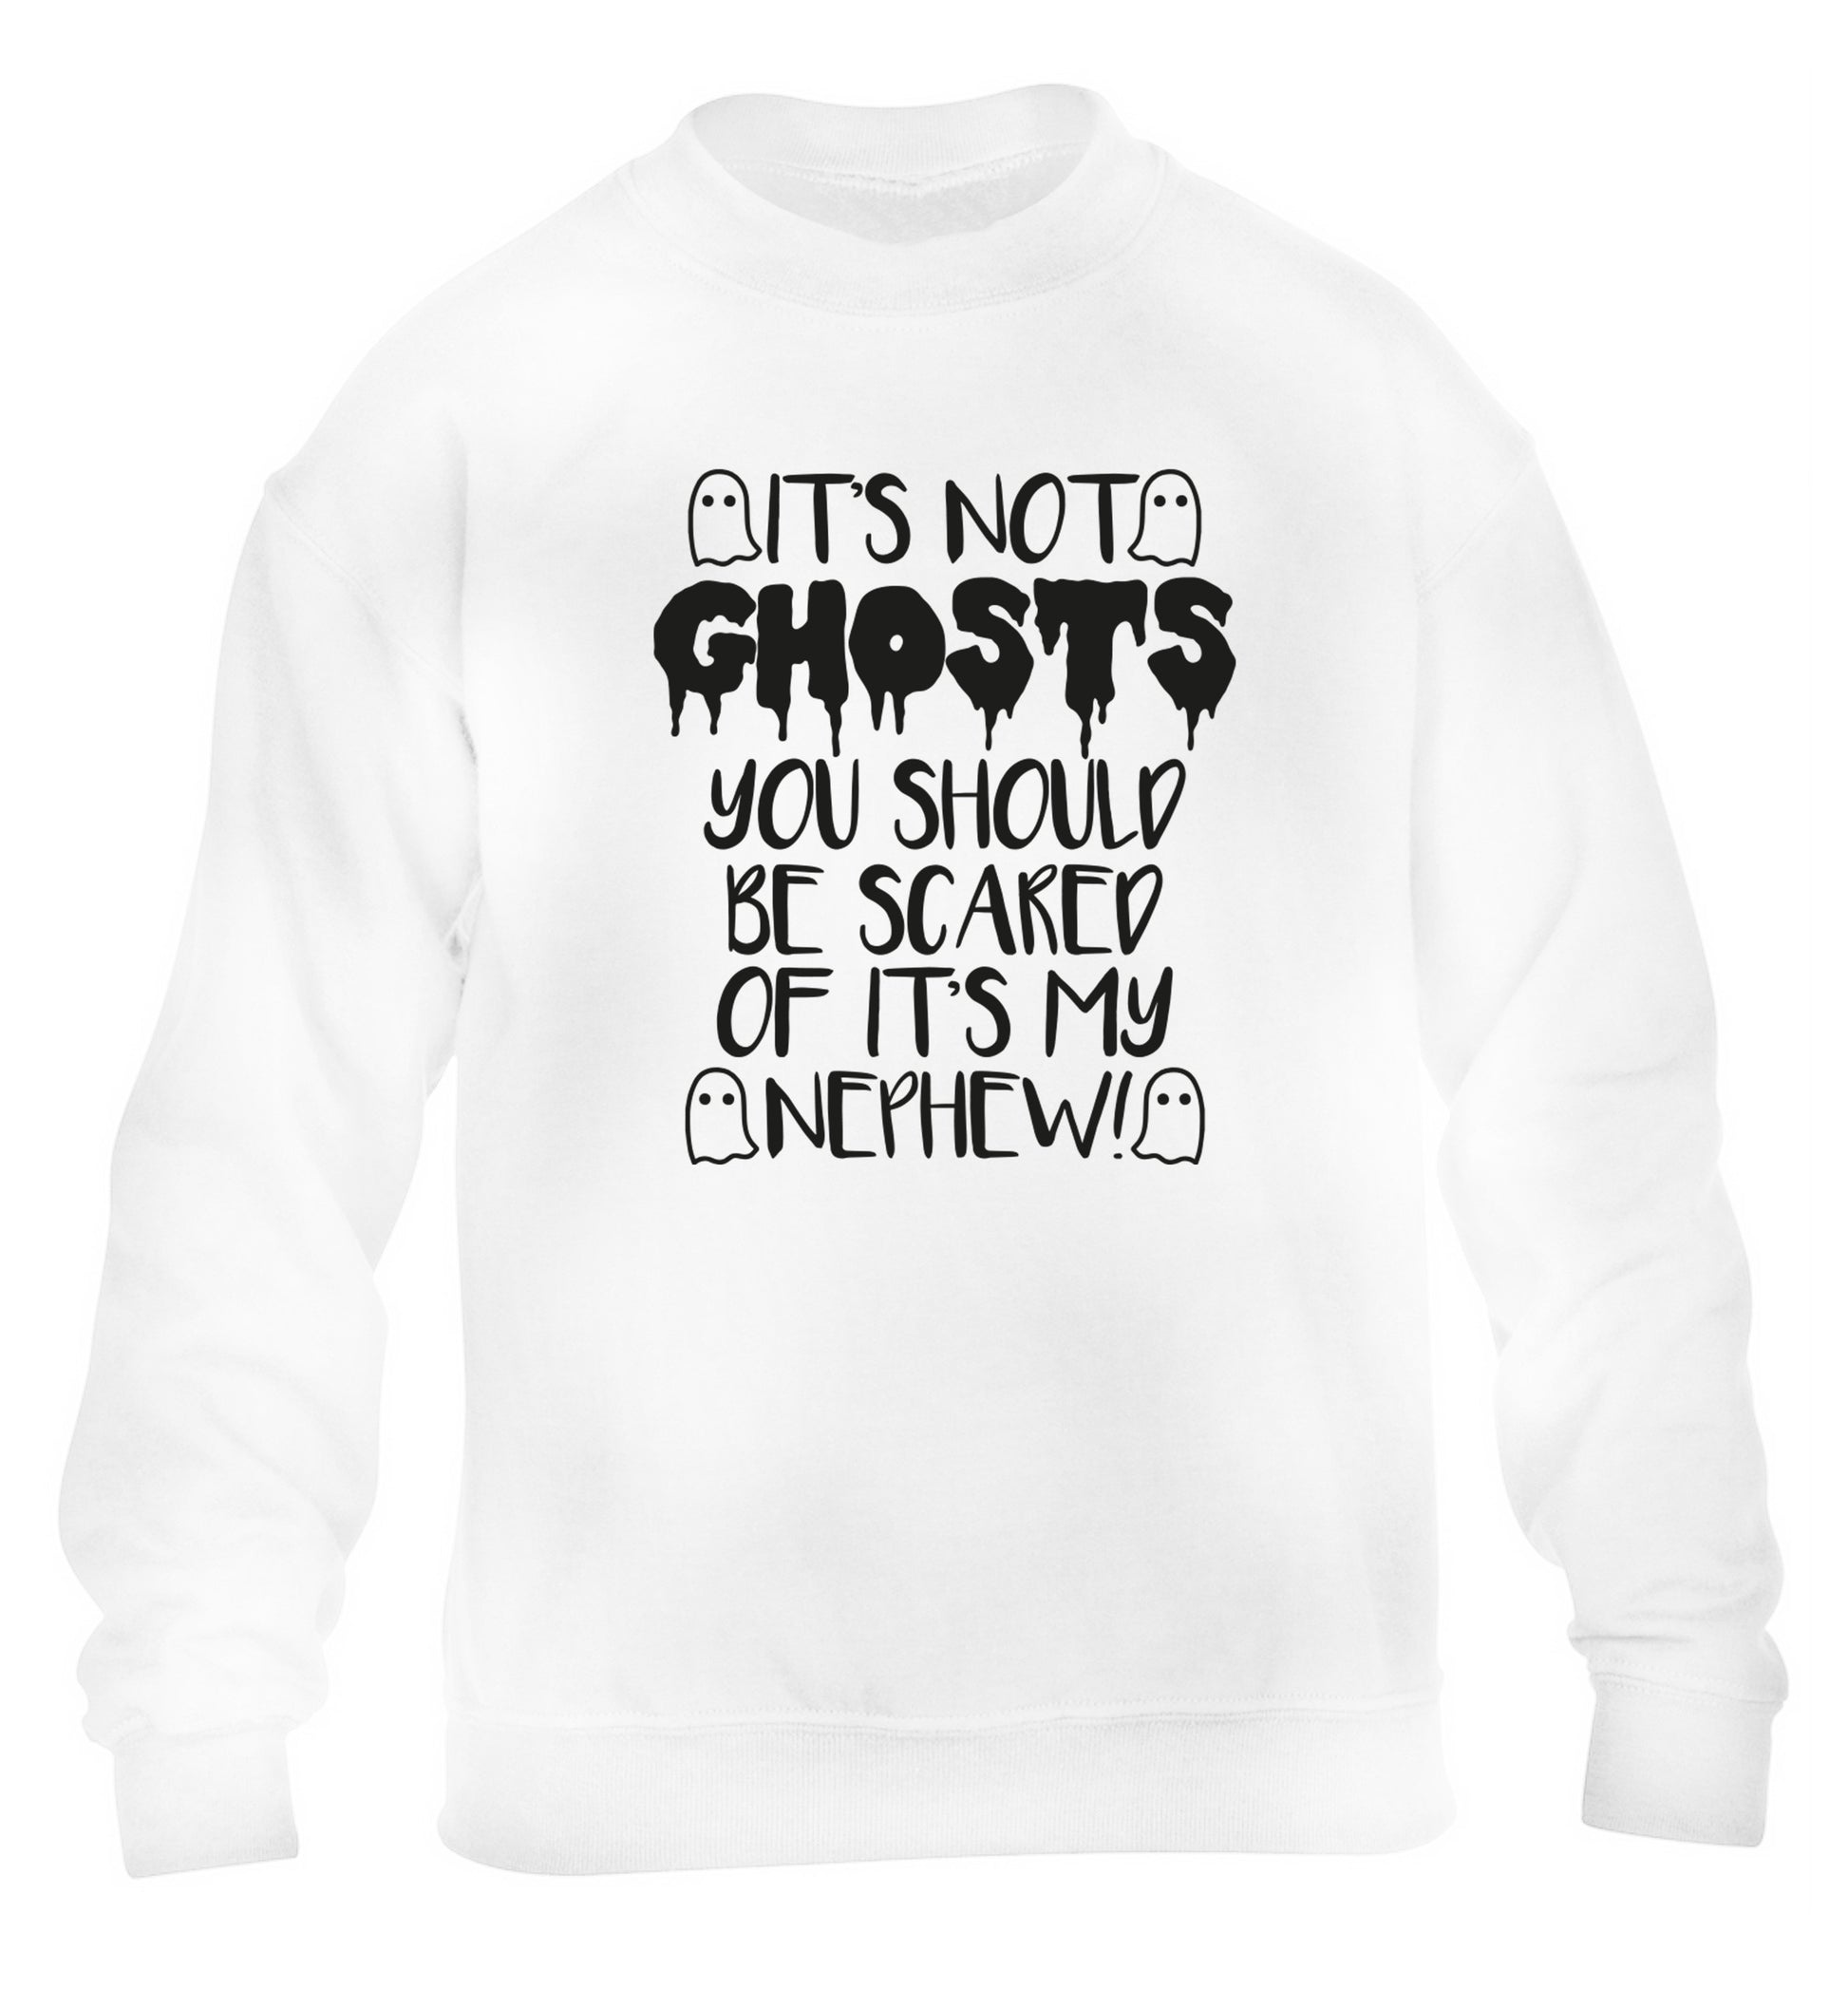 It's not ghosts you should be scared of it's my nephew! children's white sweater 12-14 Years